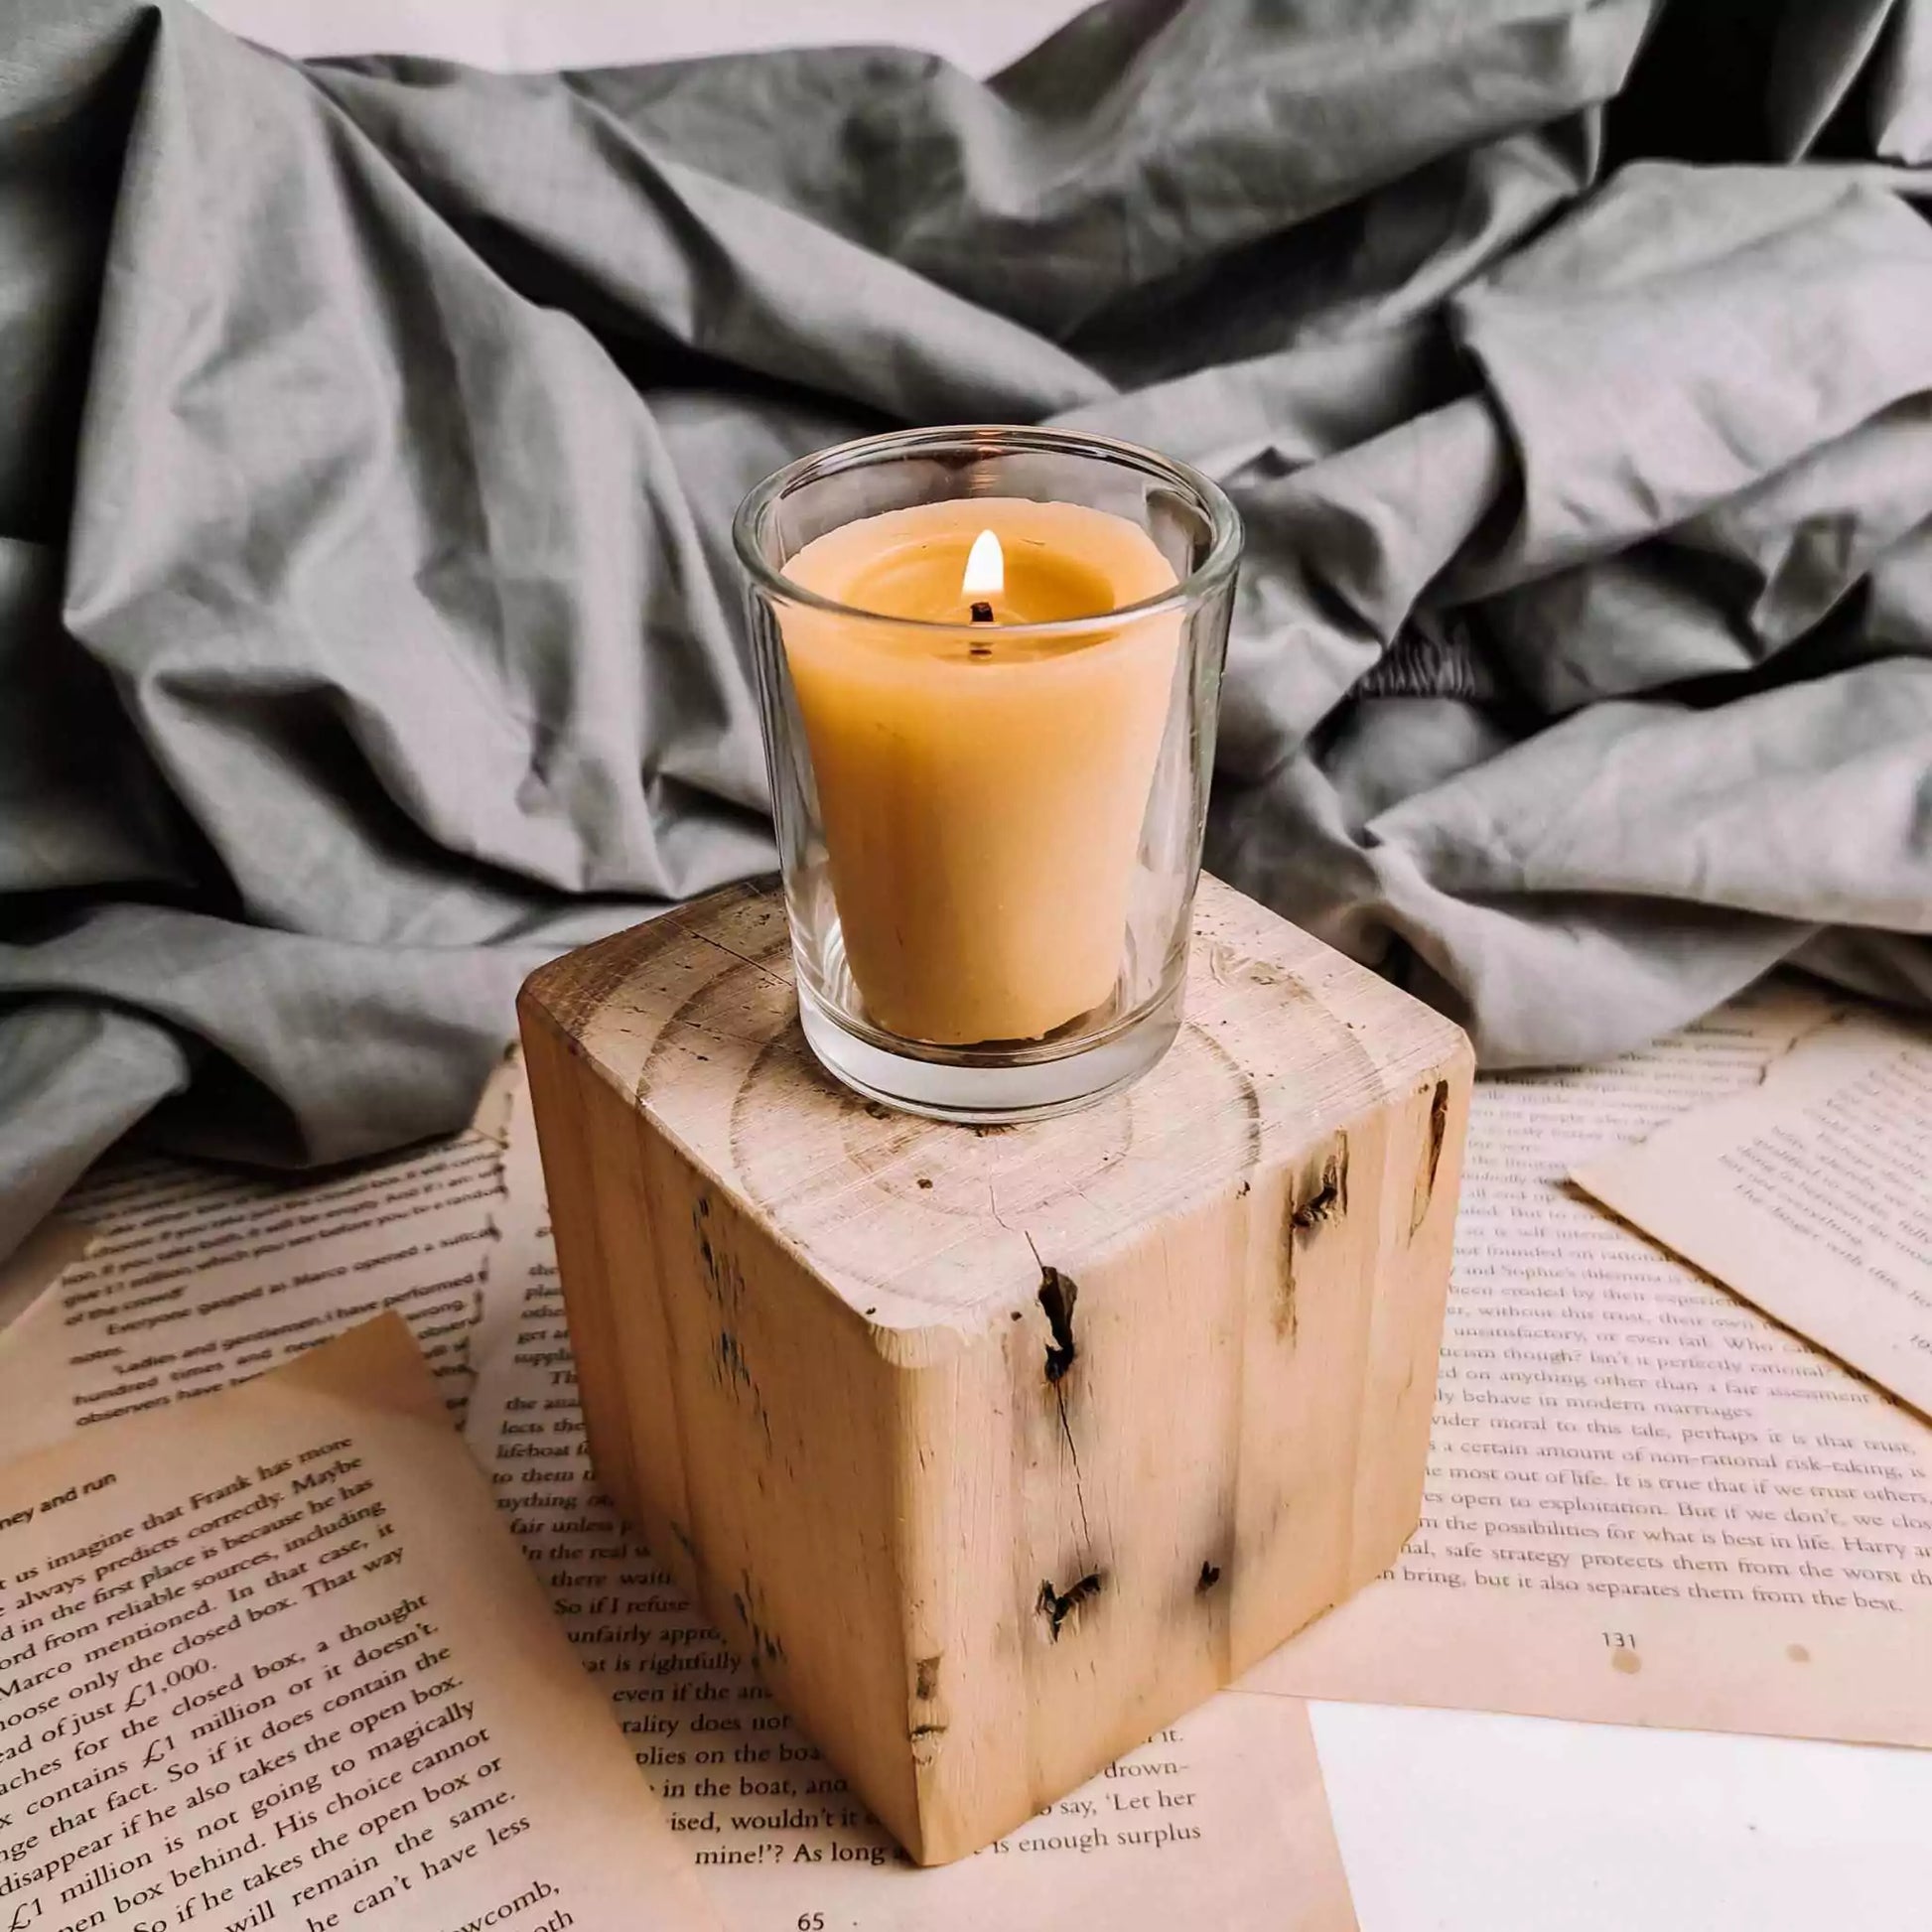 Handmade in the UK, these natural beeswax votive candles provide over 20 hours of clean, sustainable light.